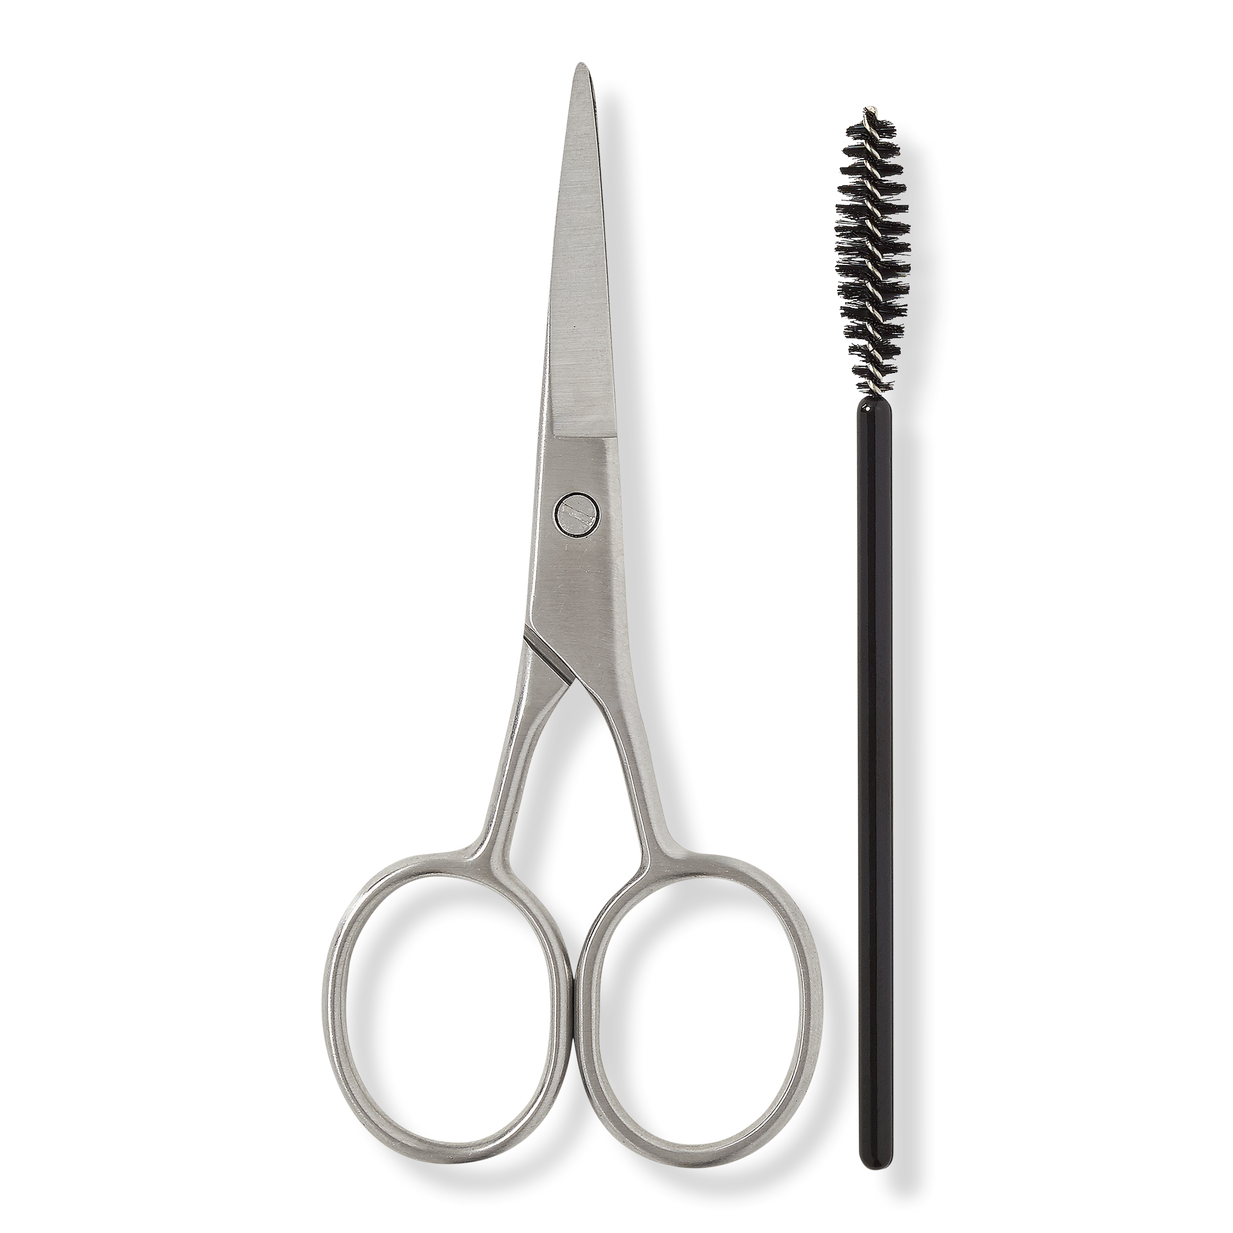 Multi-function Cuticle Small Scissors Used for Men and Women.